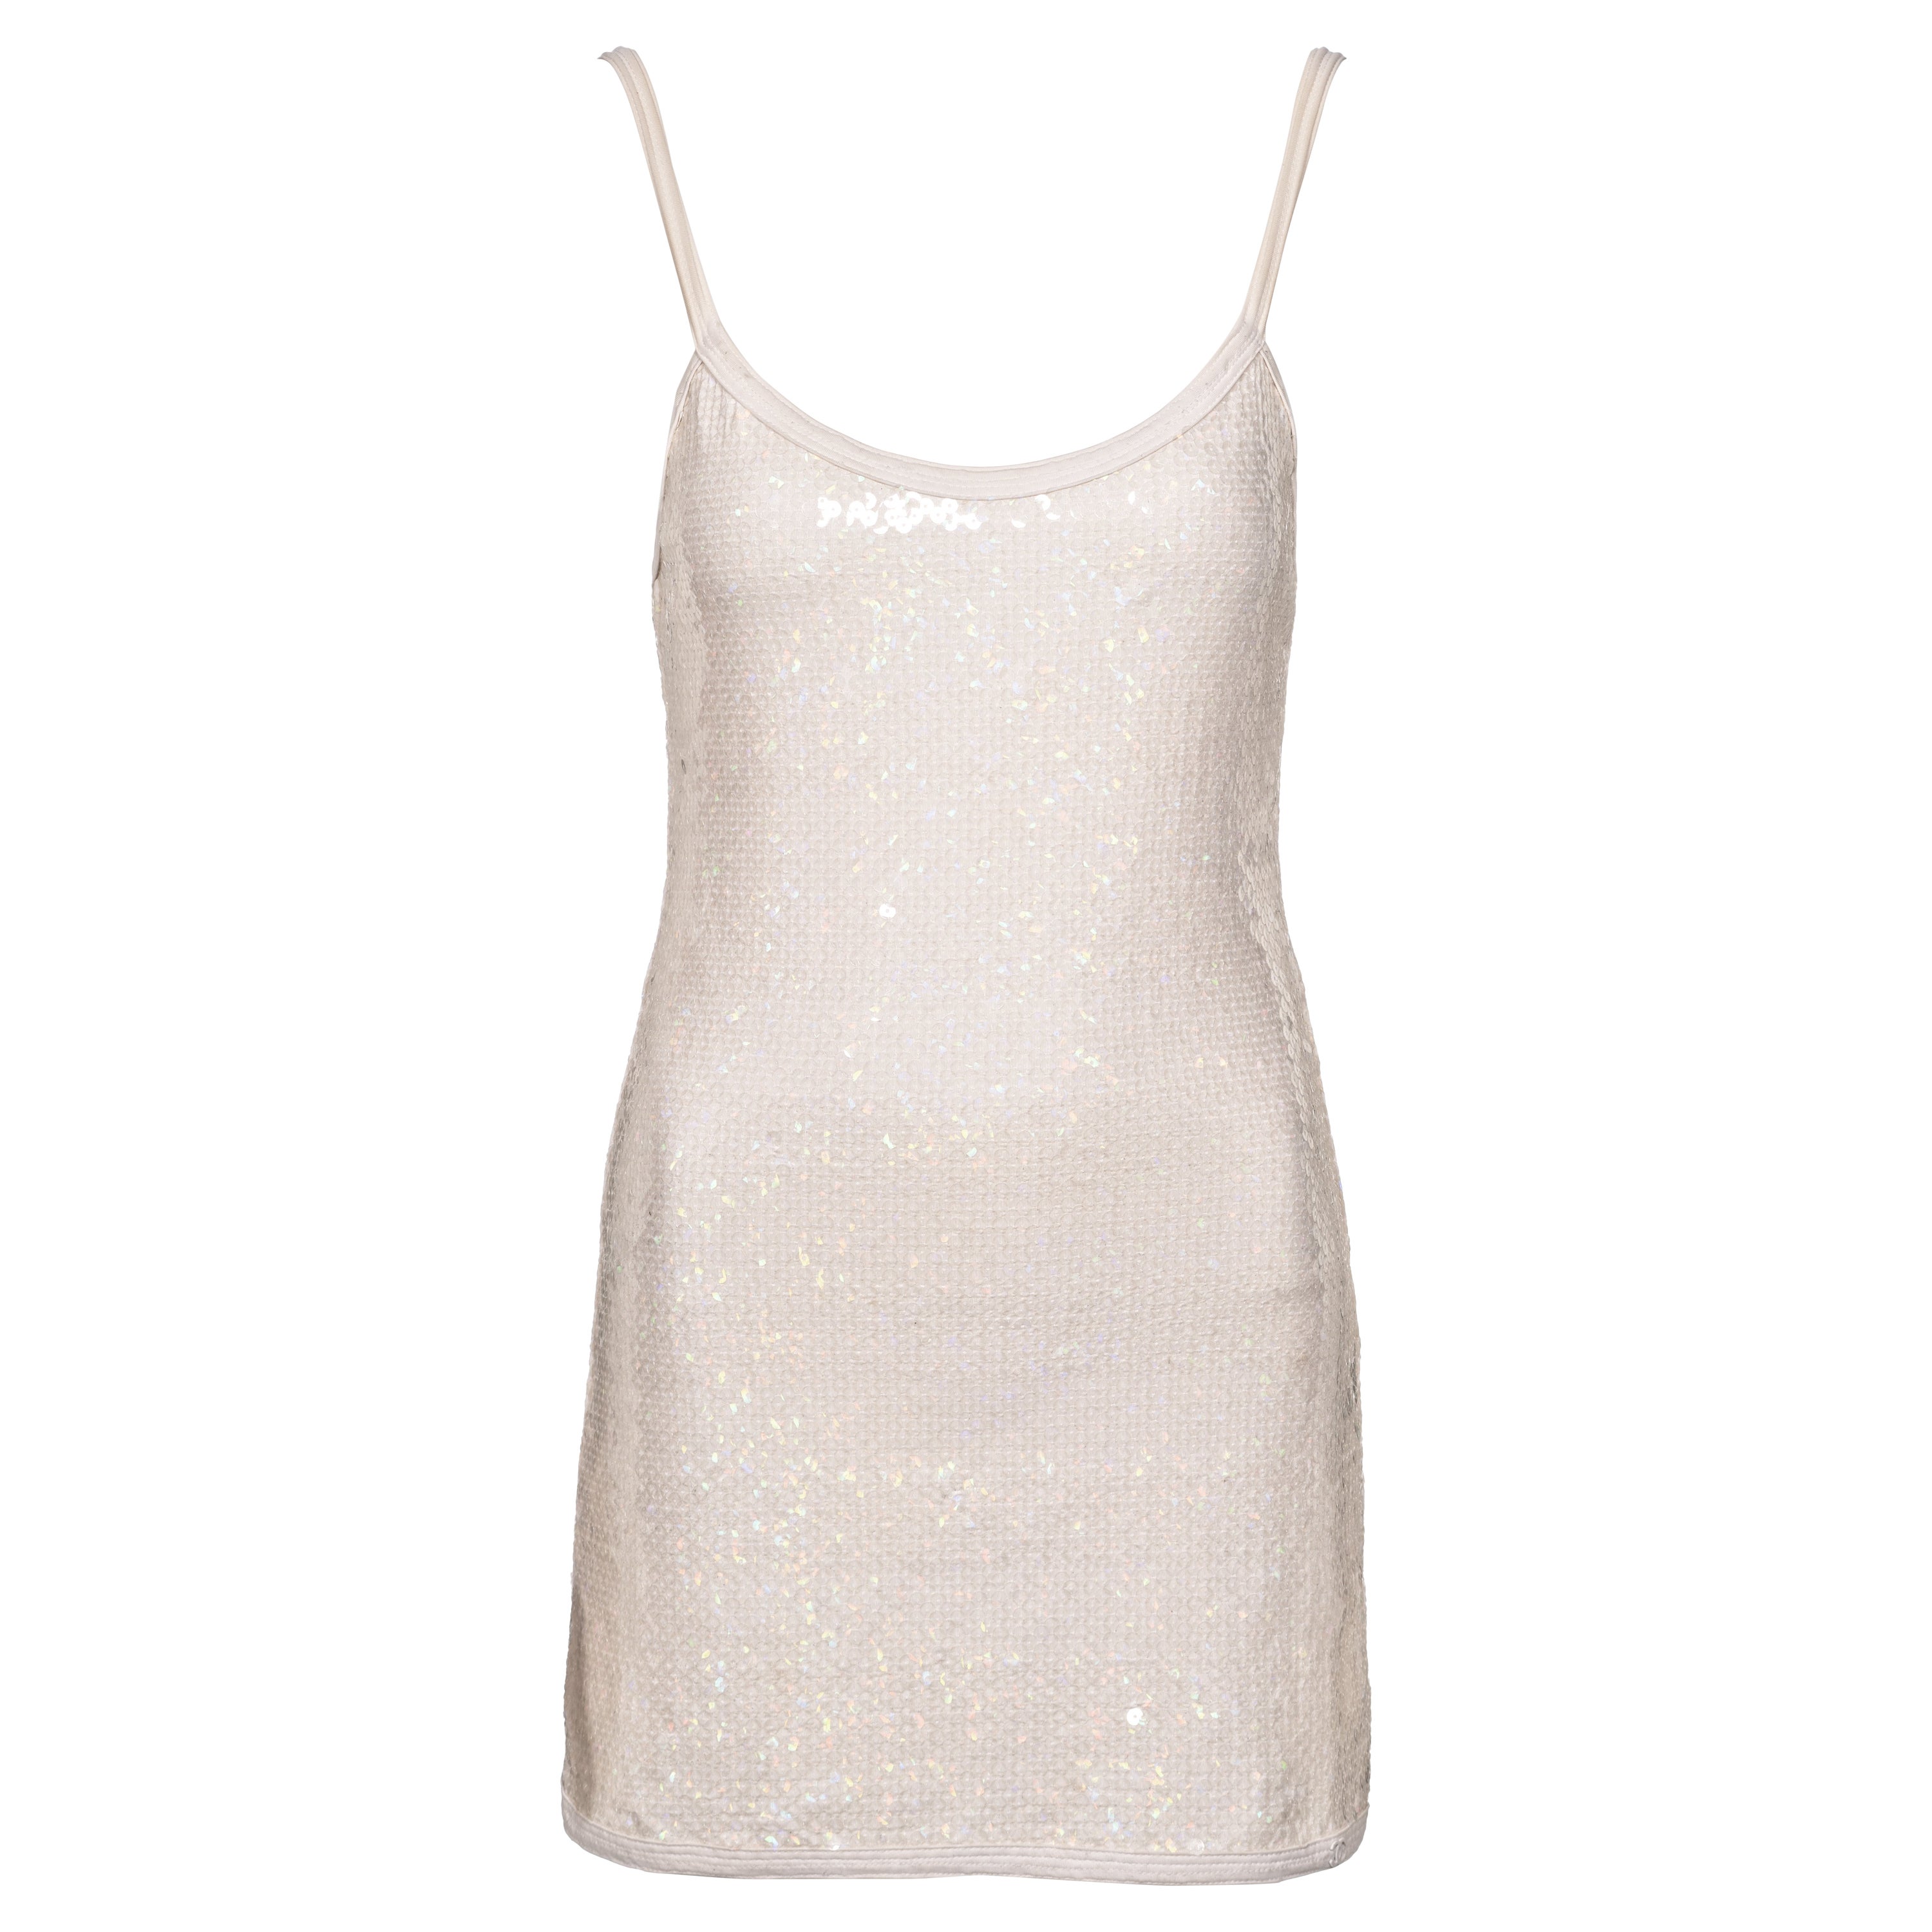 Chanel by Karl Lagerfeld White Iridescent Sequin Mini Dress, ss 2005